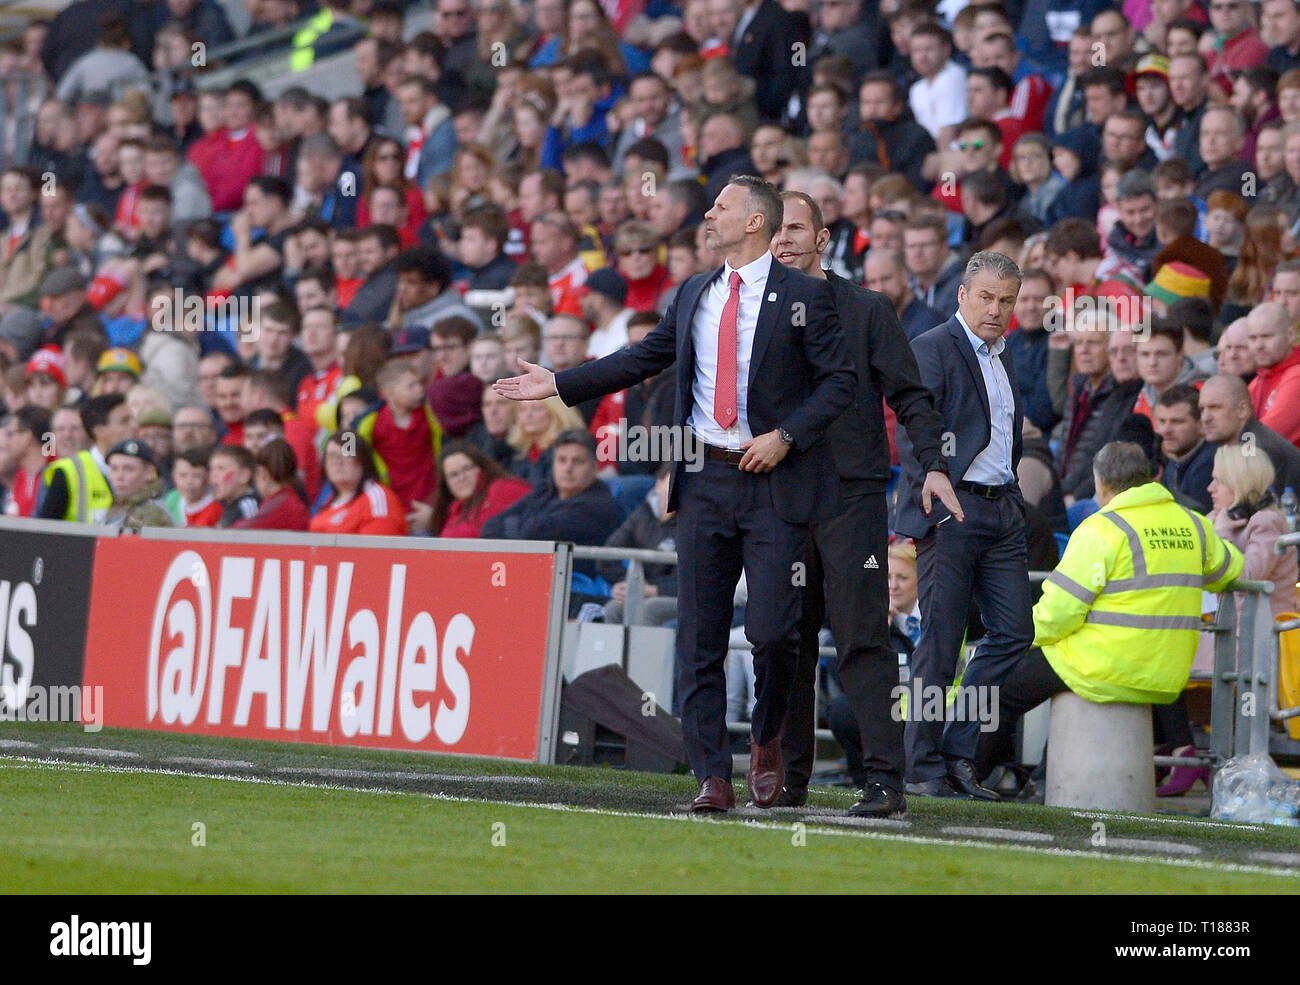 Cardiff, Wales, UK. 24th Mar 2019. Football, UEFA European Qualifiers Group E, Wales v Slovakia, 24/03/19, Cardiff City Stadium, K.O 2PM  Wales manager Ryan Giggs shouts orders out from the touchline  Andrew Dowling Credit: Andrew Dowling/Influential Photography/Alamy Live News Stock Photo